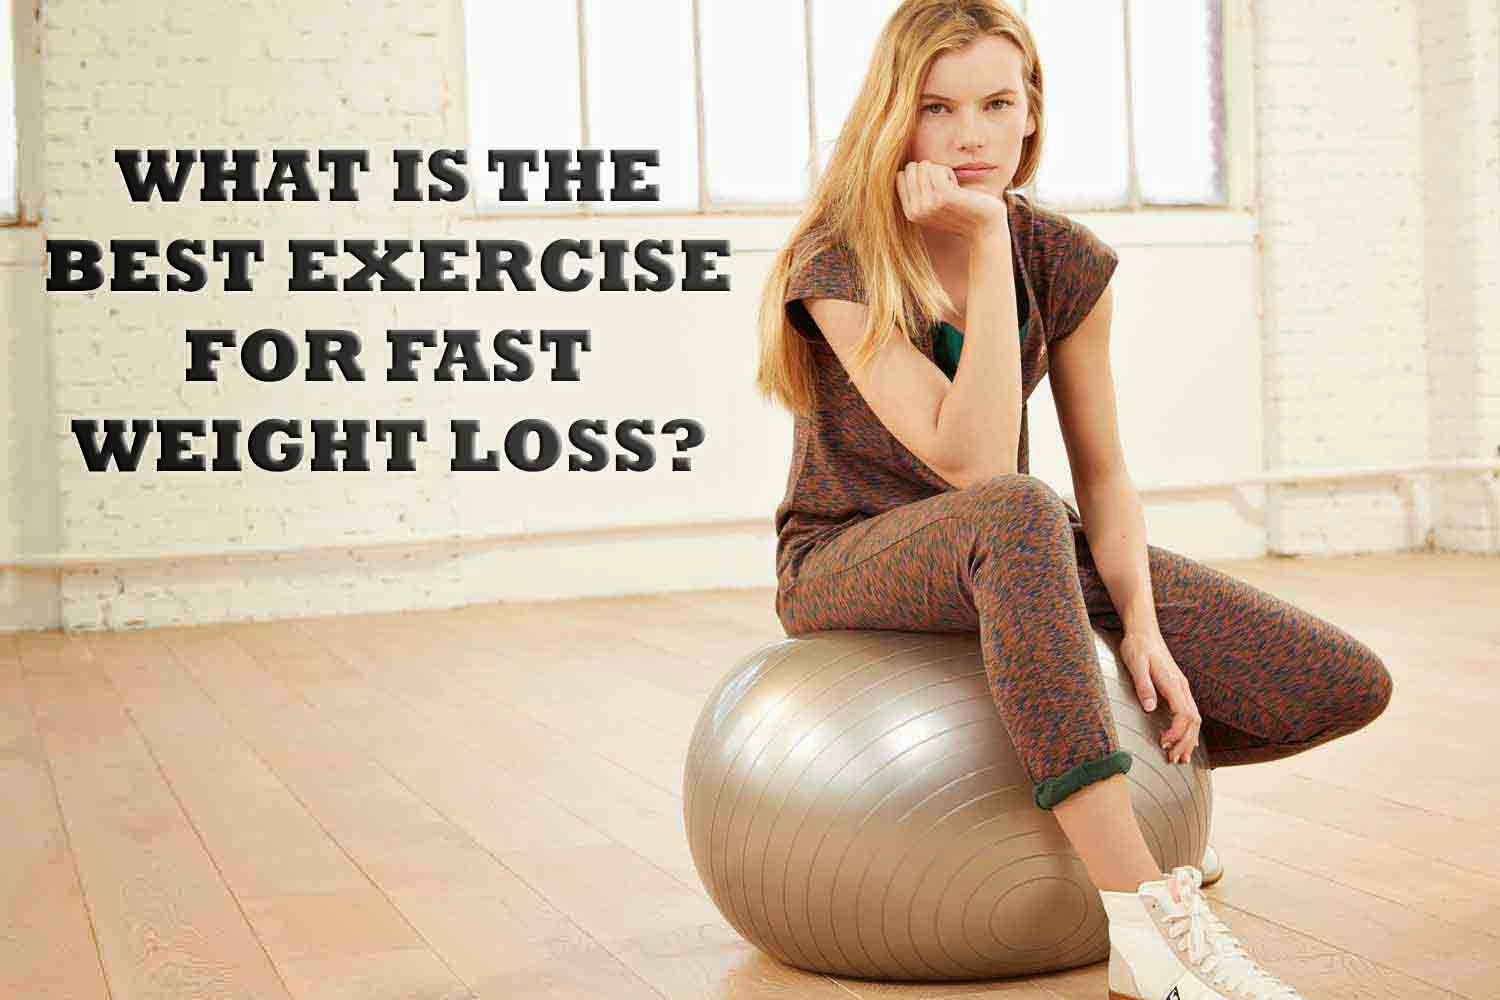 What Is The Best Exercise For Fast Weight Loss?